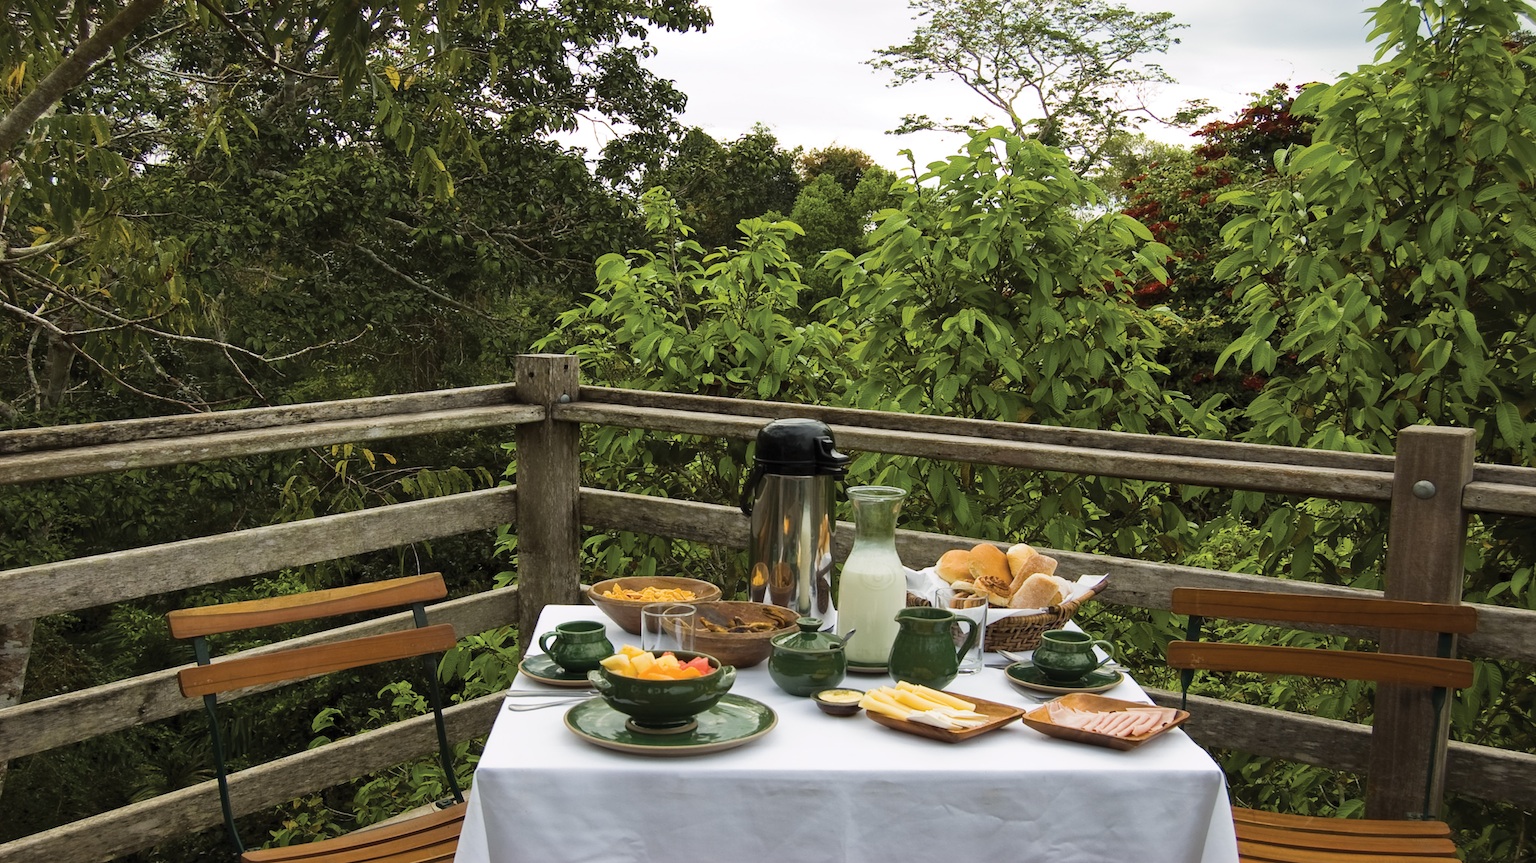 ITRA_CanopyTreeHouse - Served table among lush vegetation copy